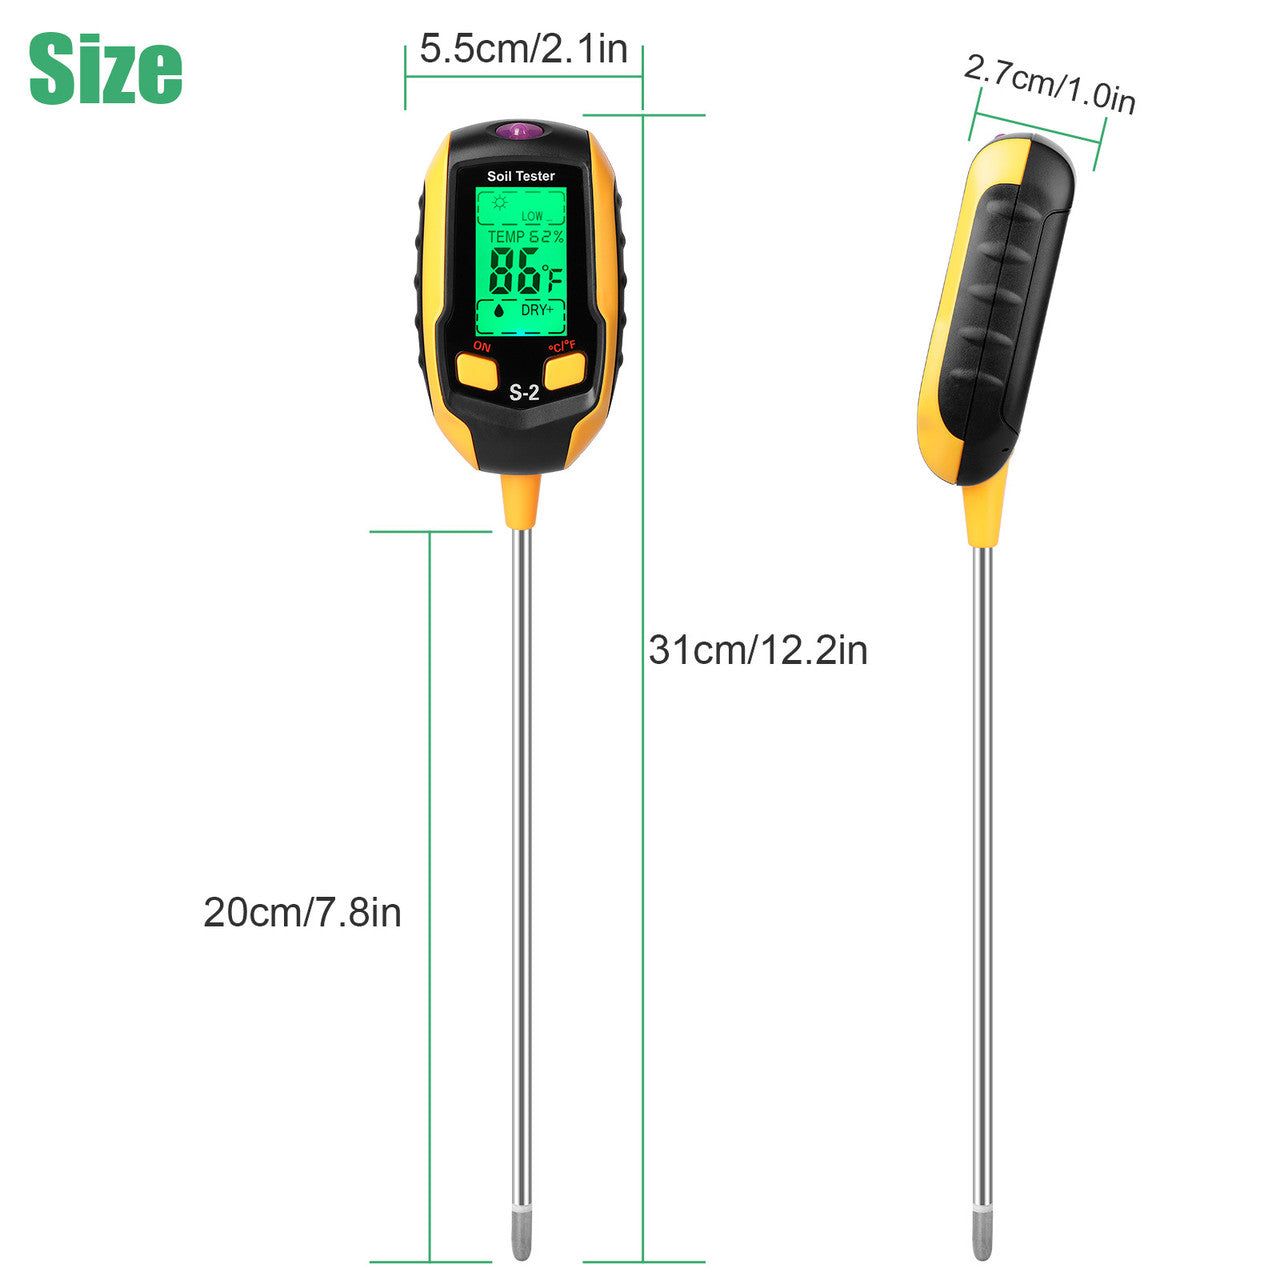 5-in-1 Soil Tester Moisture for Outdoor Gardening and Work with a LED Crystal Display